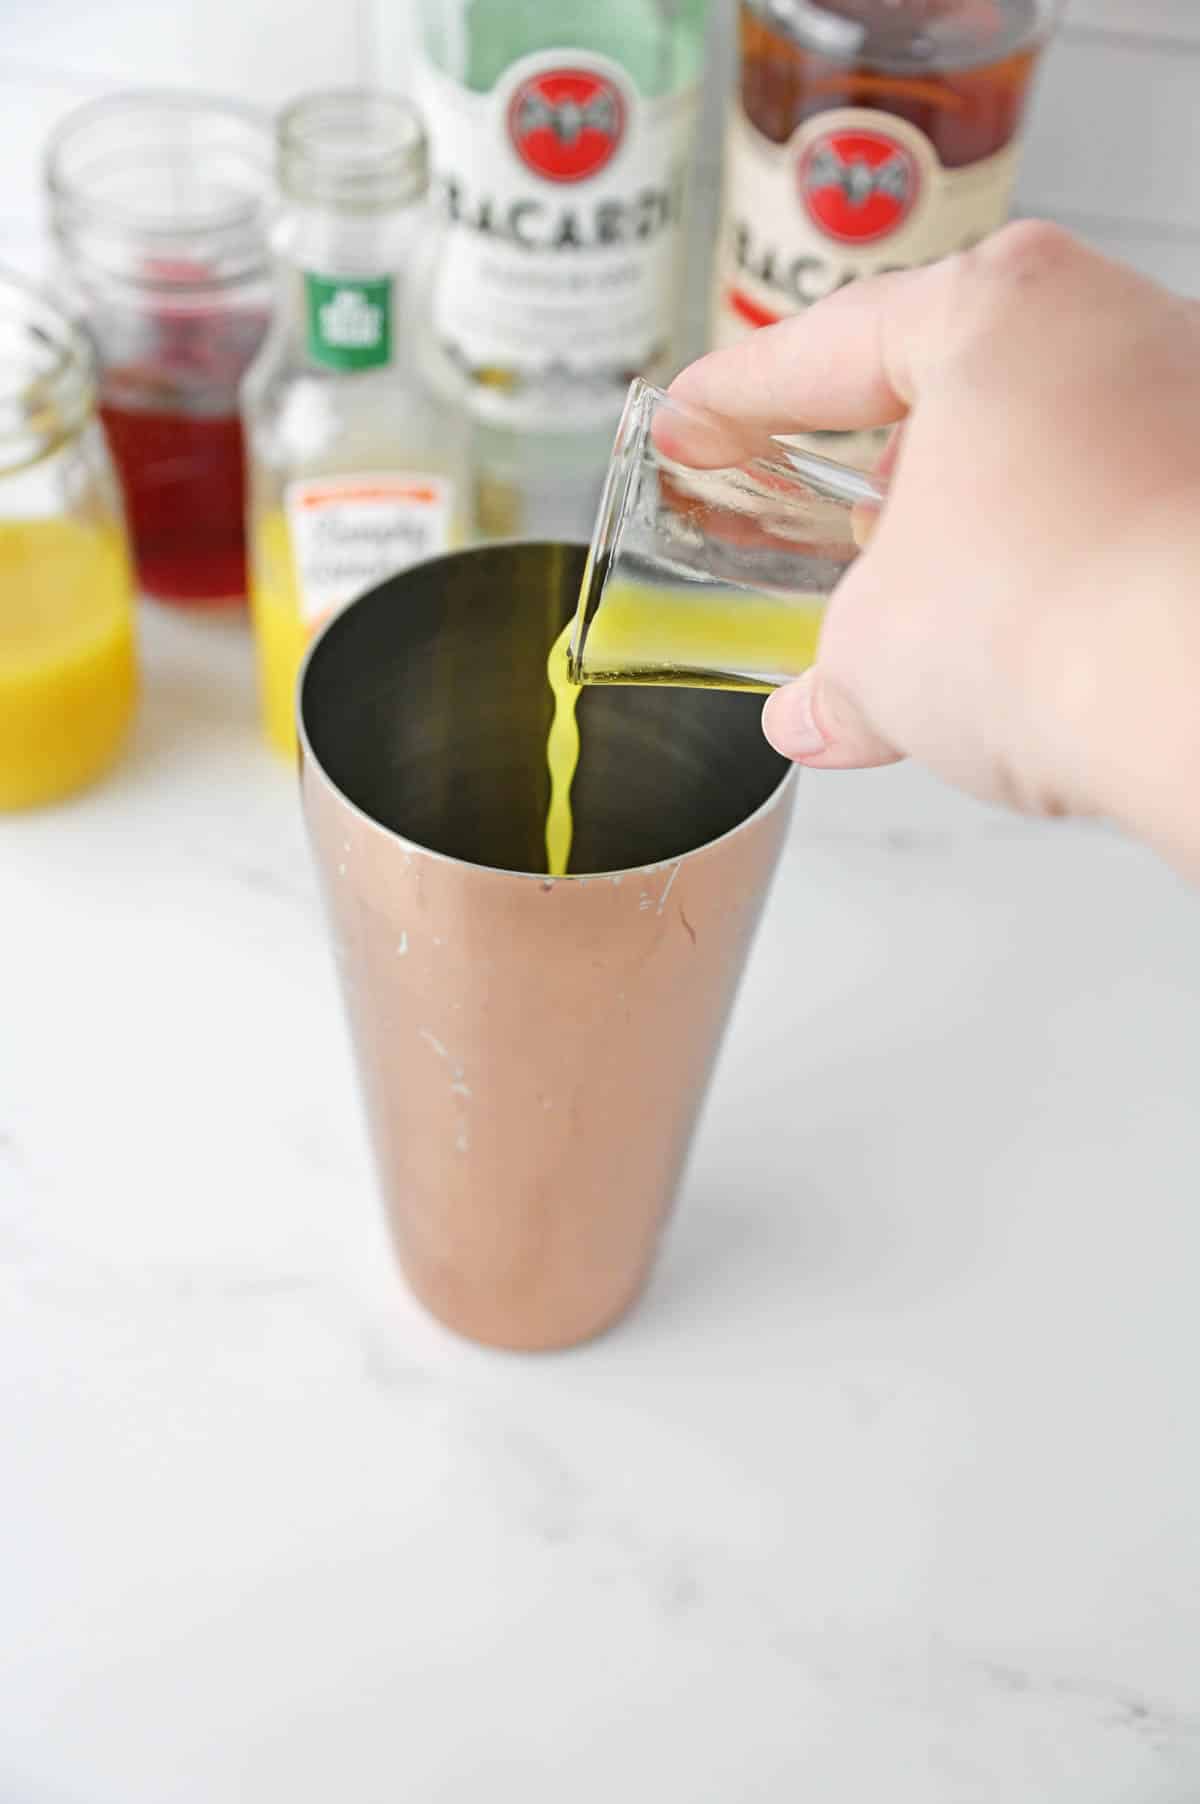 Pouring juice into a shaker cup.